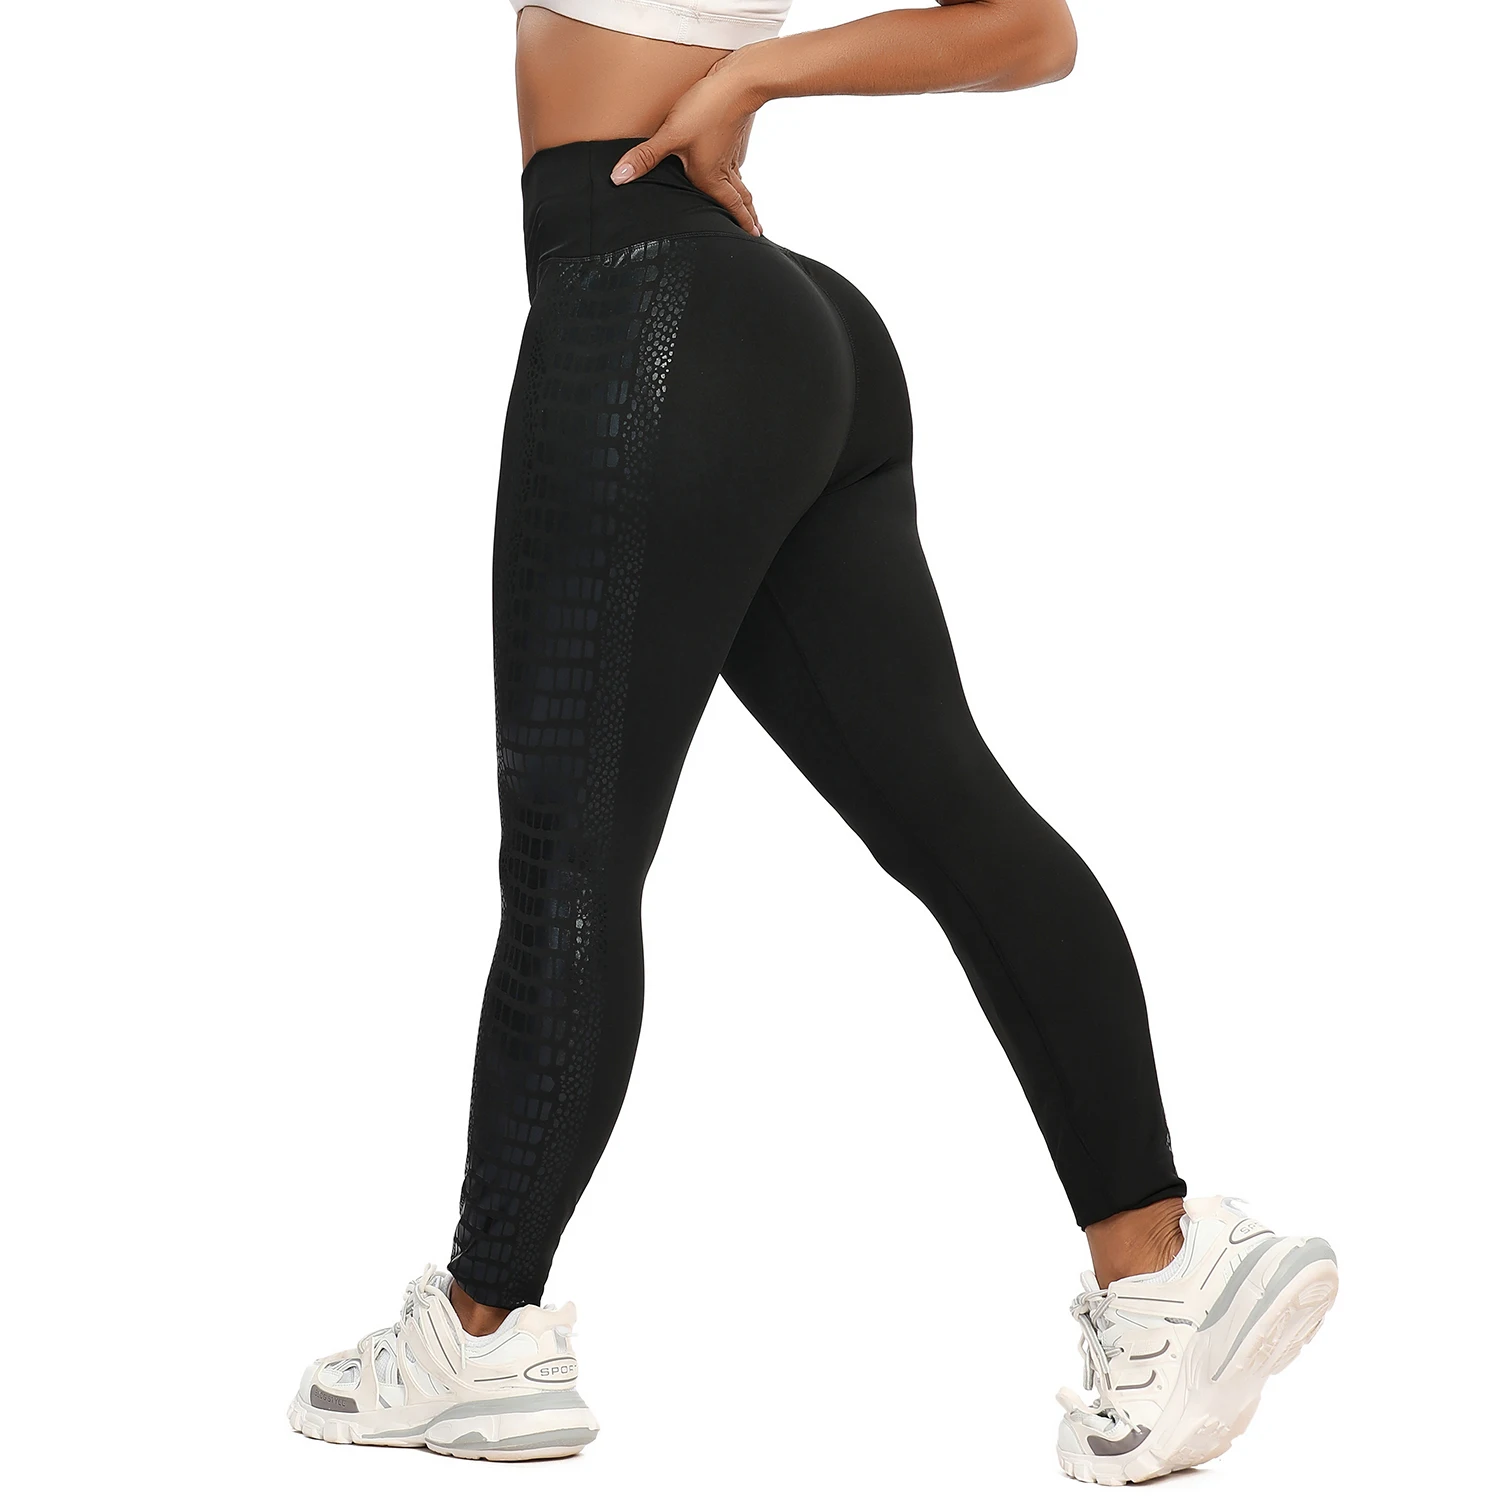 Yoga Pants Fitness Women Seamless Leggings Mujer High Exercise Waist Push Up Curvy Elastic Sports Trousers Gym Running Pants